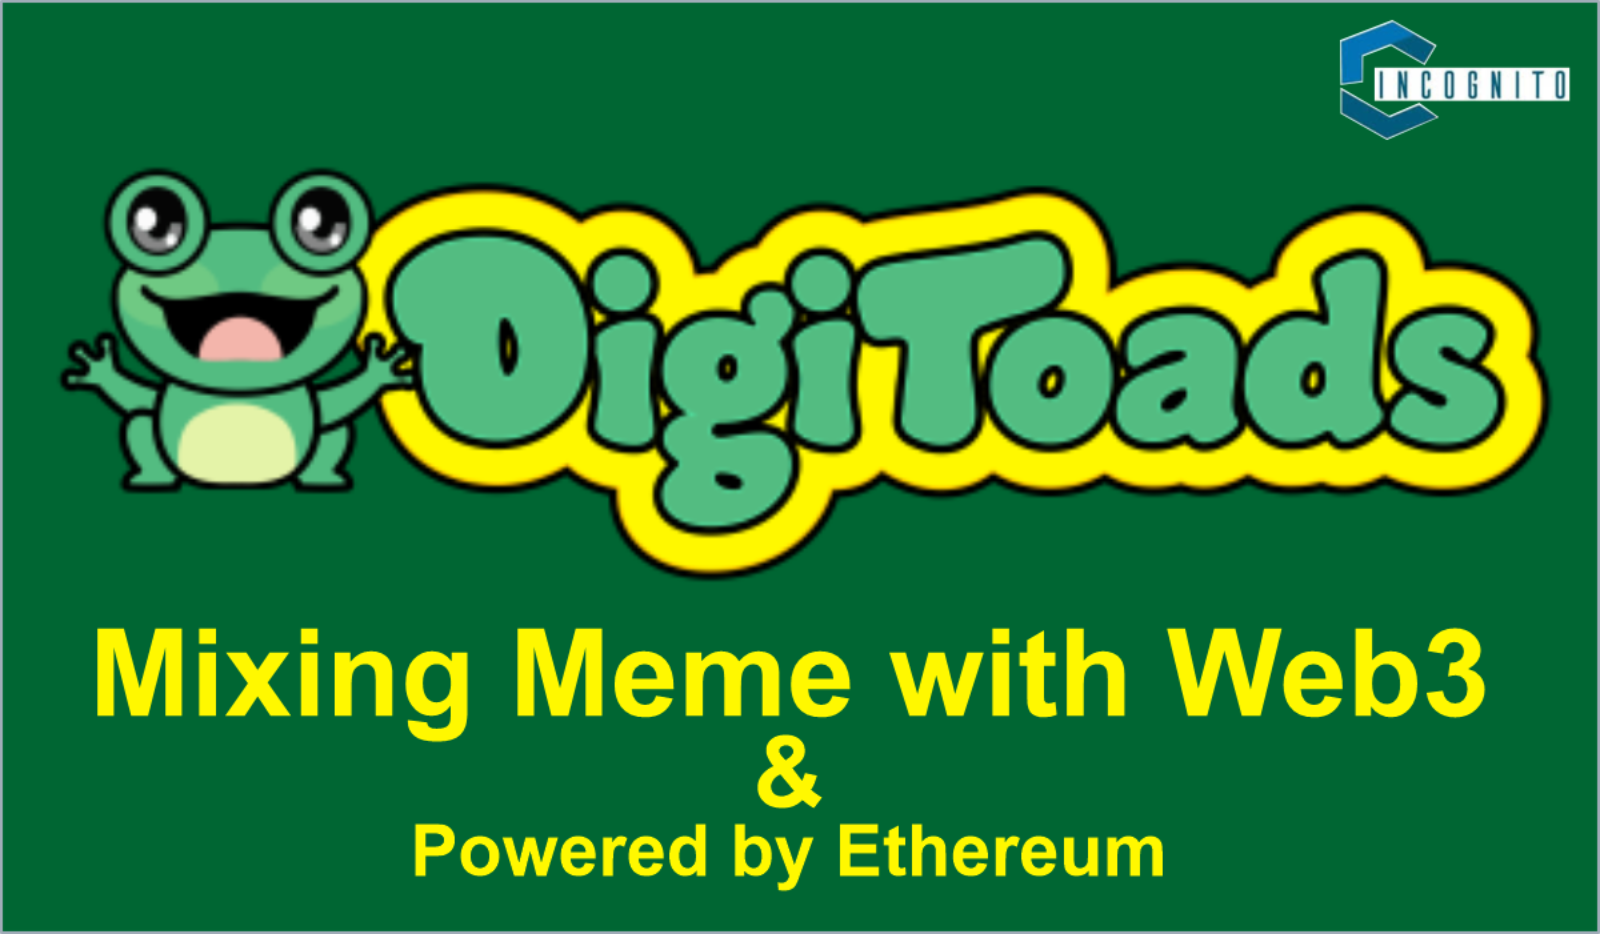 Digitoads: Mixing Meme with Web3 & Powered by Ethereum